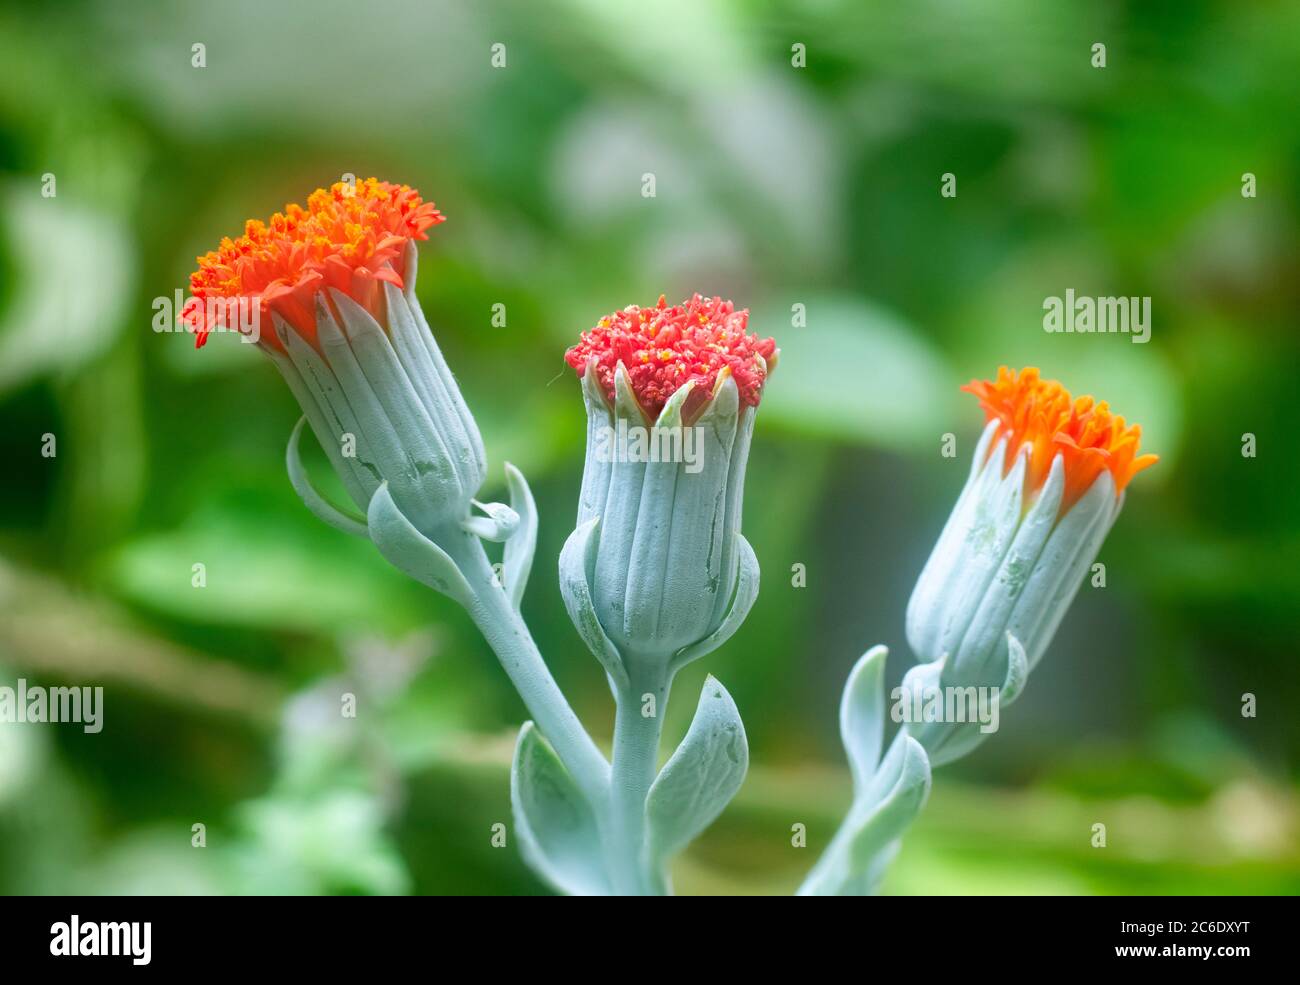 Close up of a flowering Kleinia fulgens common names include Scarlet Kleinia, Coral Senecio (in the past was Senecio fulgens) is a species from the ge Stock Photo